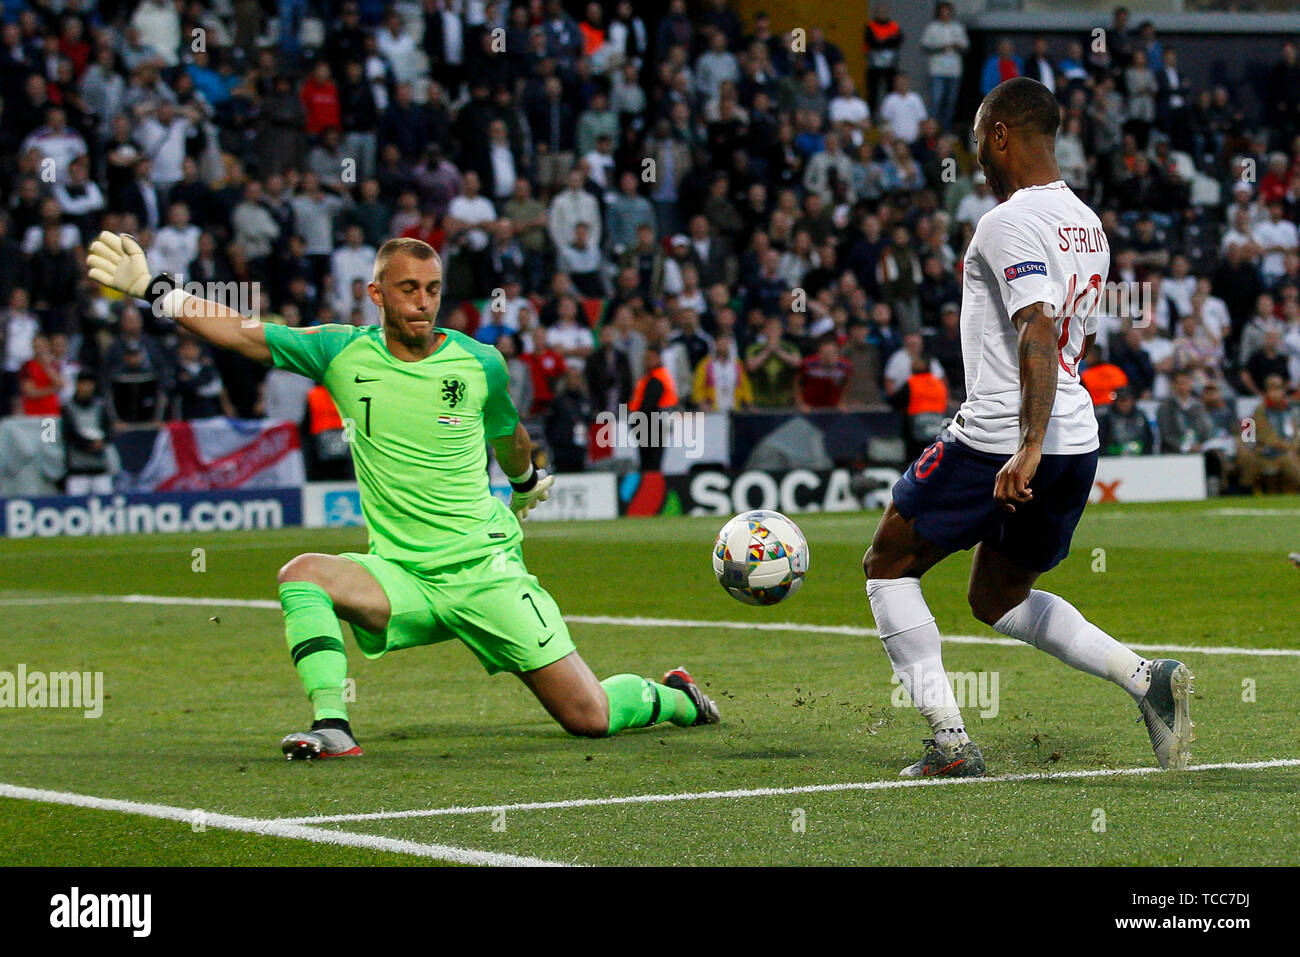 Guimaraes, Portugal. 06th June, 2019. Jasper Cillessen of Netherlands saves from Raheem Sterling of England during the UEFA Nations League Semi Final match between Netherlands and England at Estadio D. Afonso Henriques on June 6th 2019 in Guimaraes, Portugal. (Photo by Daniel Chesterton/phcimages.com) Credit: PHC Images/Alamy Live News Stock Photo